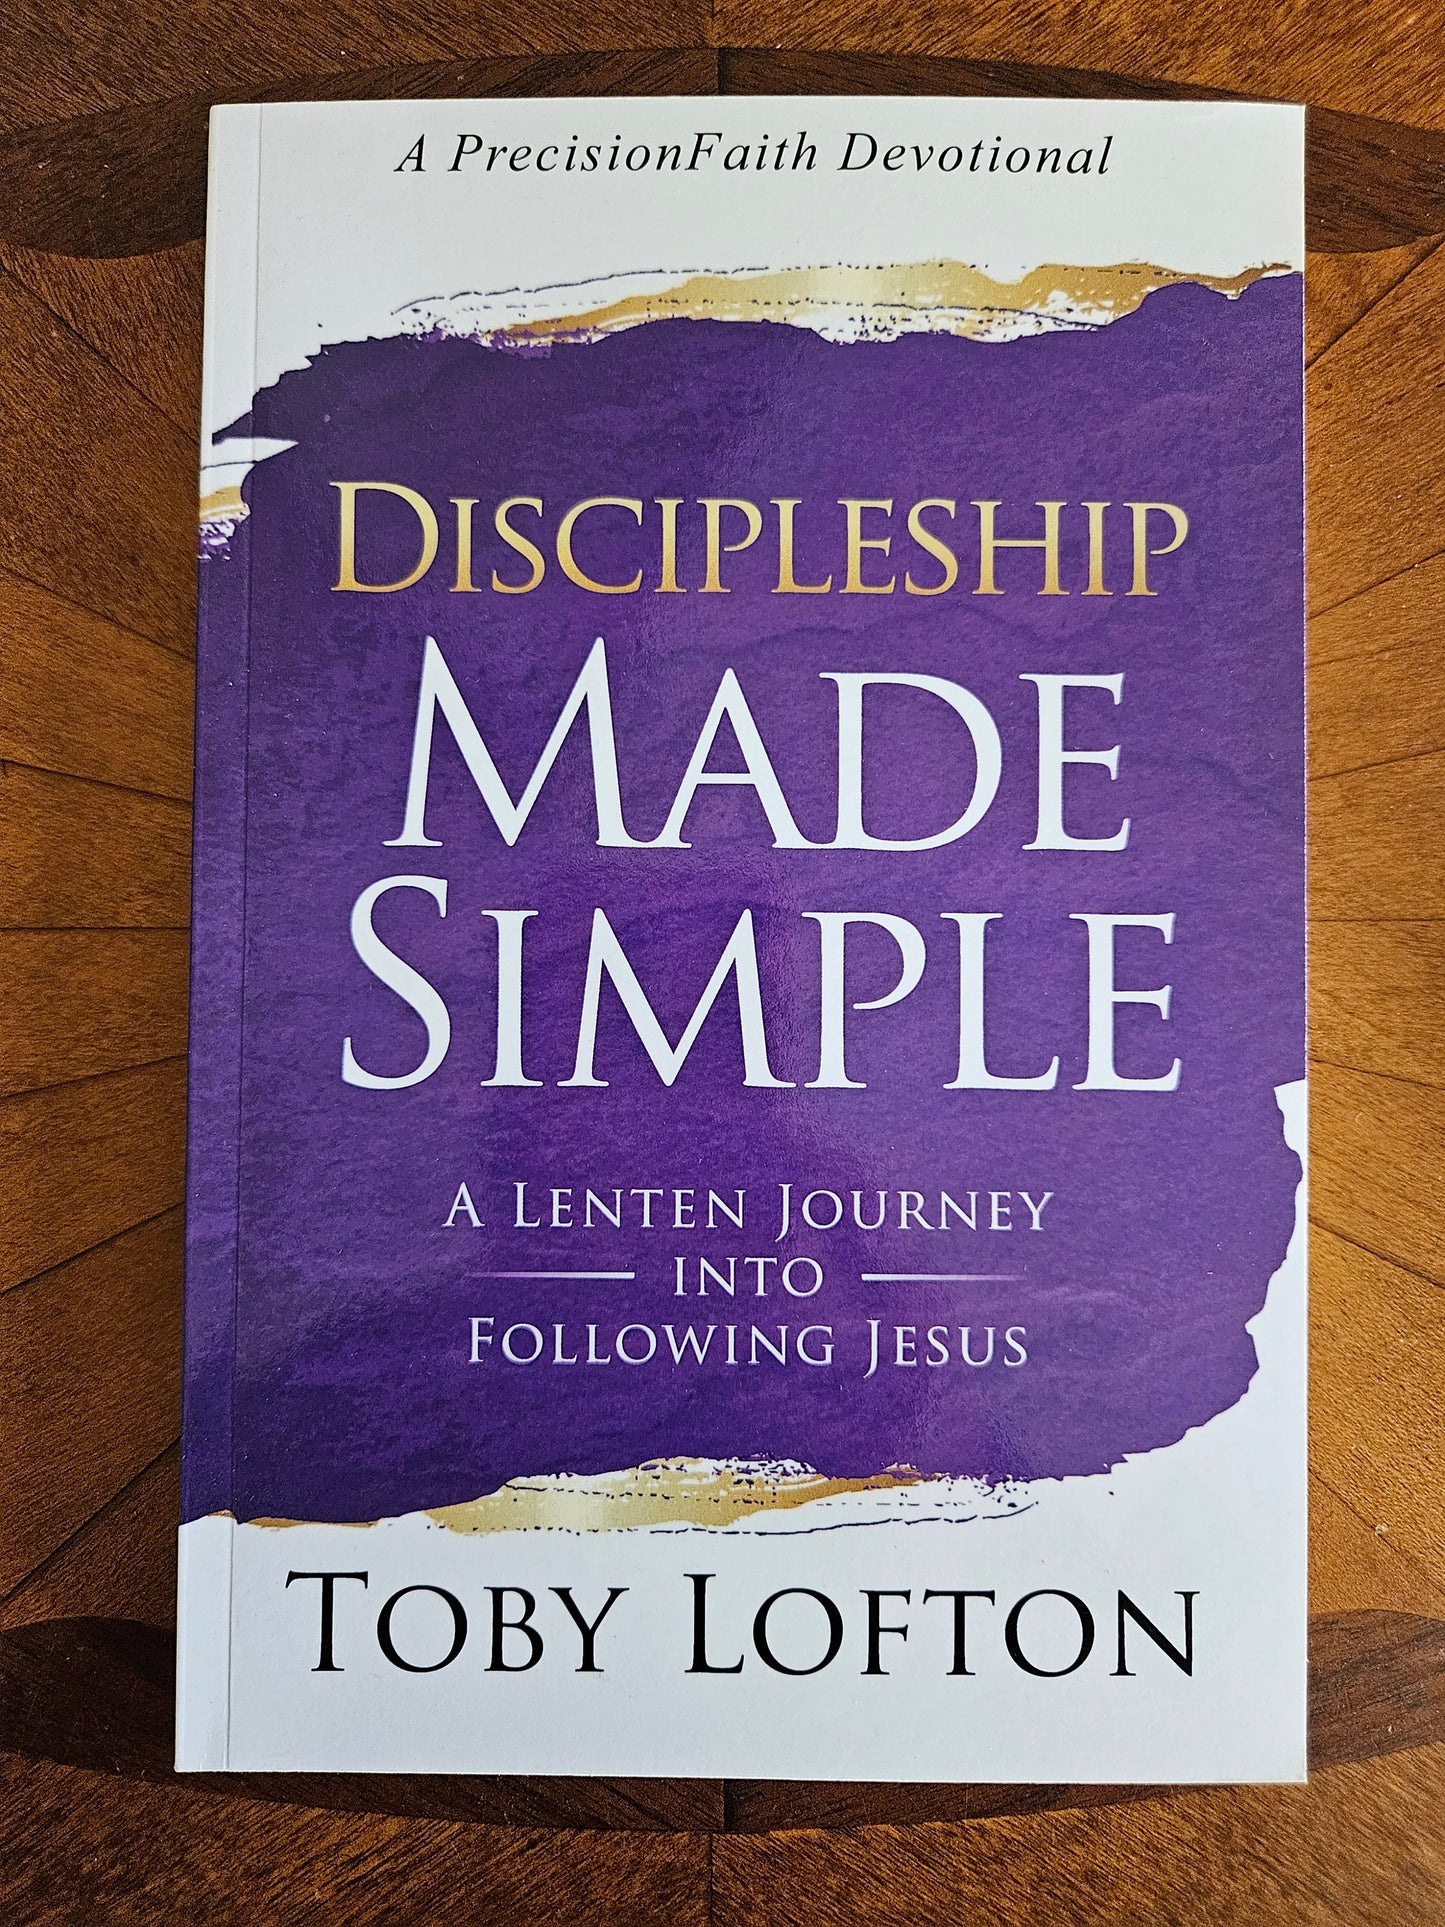 Discipleship Made Simple: A Lenten Journey into Following Jesus (Paperback)